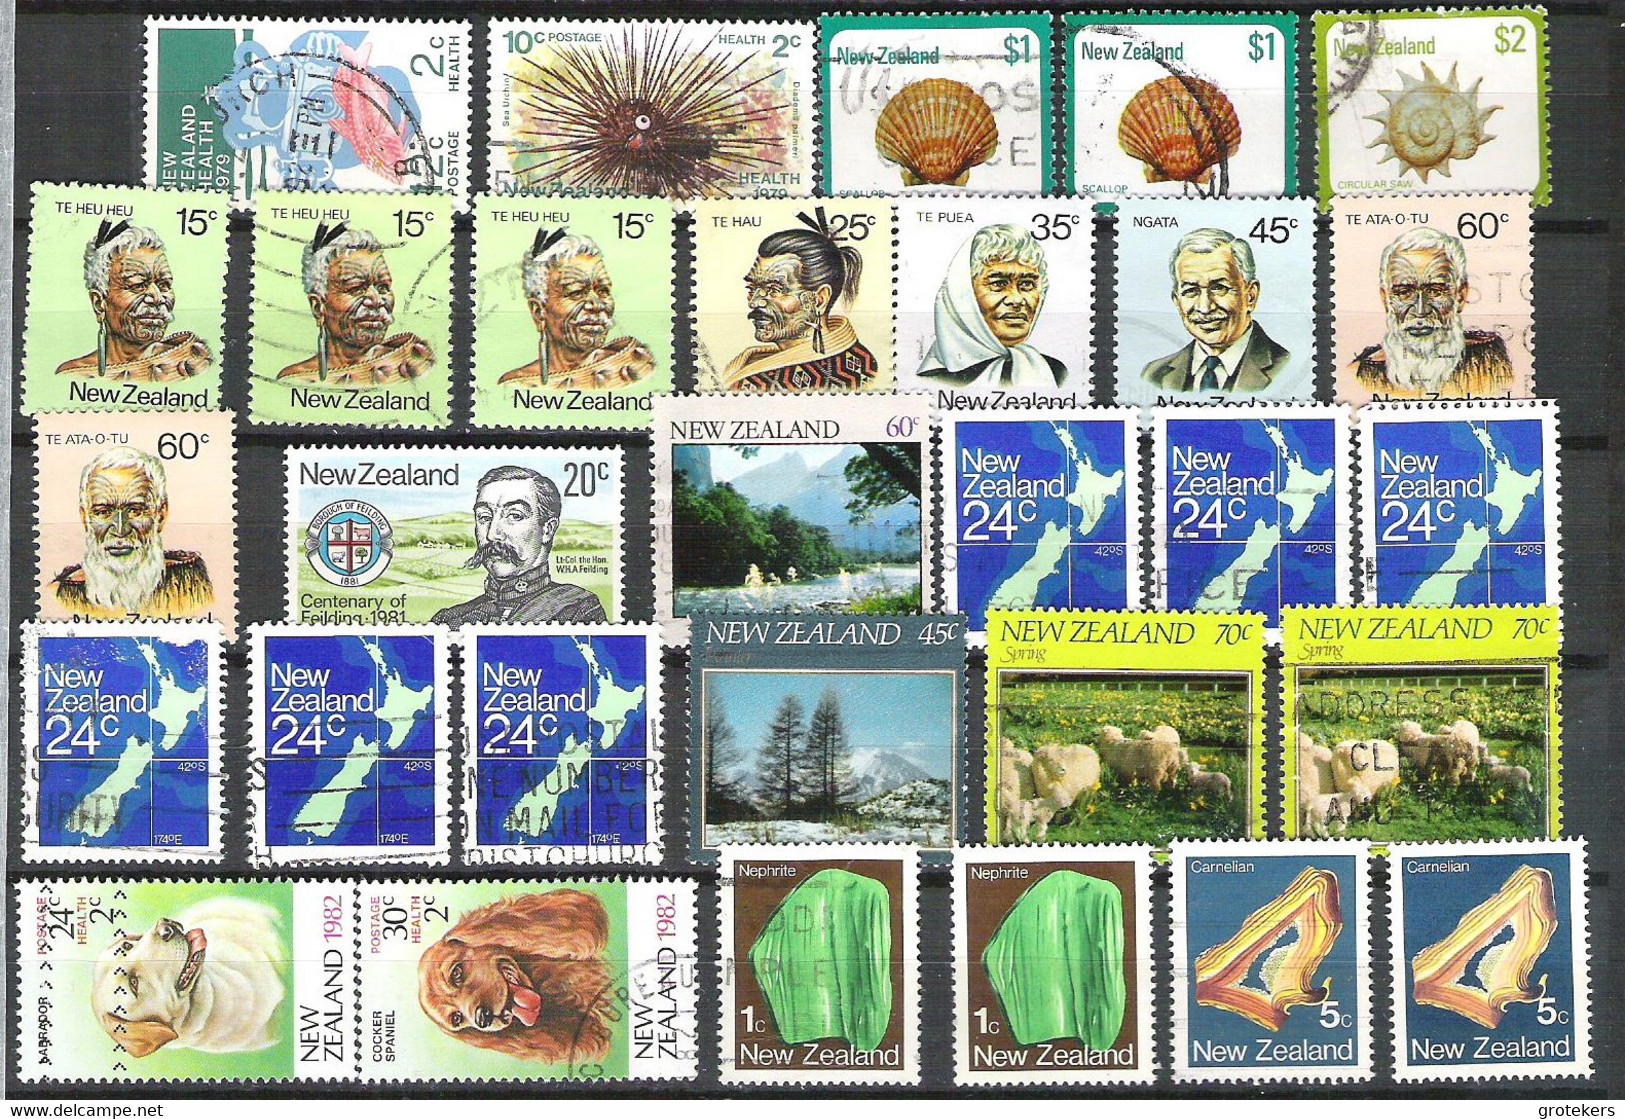 NEW ZEALAND Nice Range Between 1975 And 1989 (10 $) For Cancellations, Colours A.s.o. Low Starting Price - Verzamelingen & Reeksen